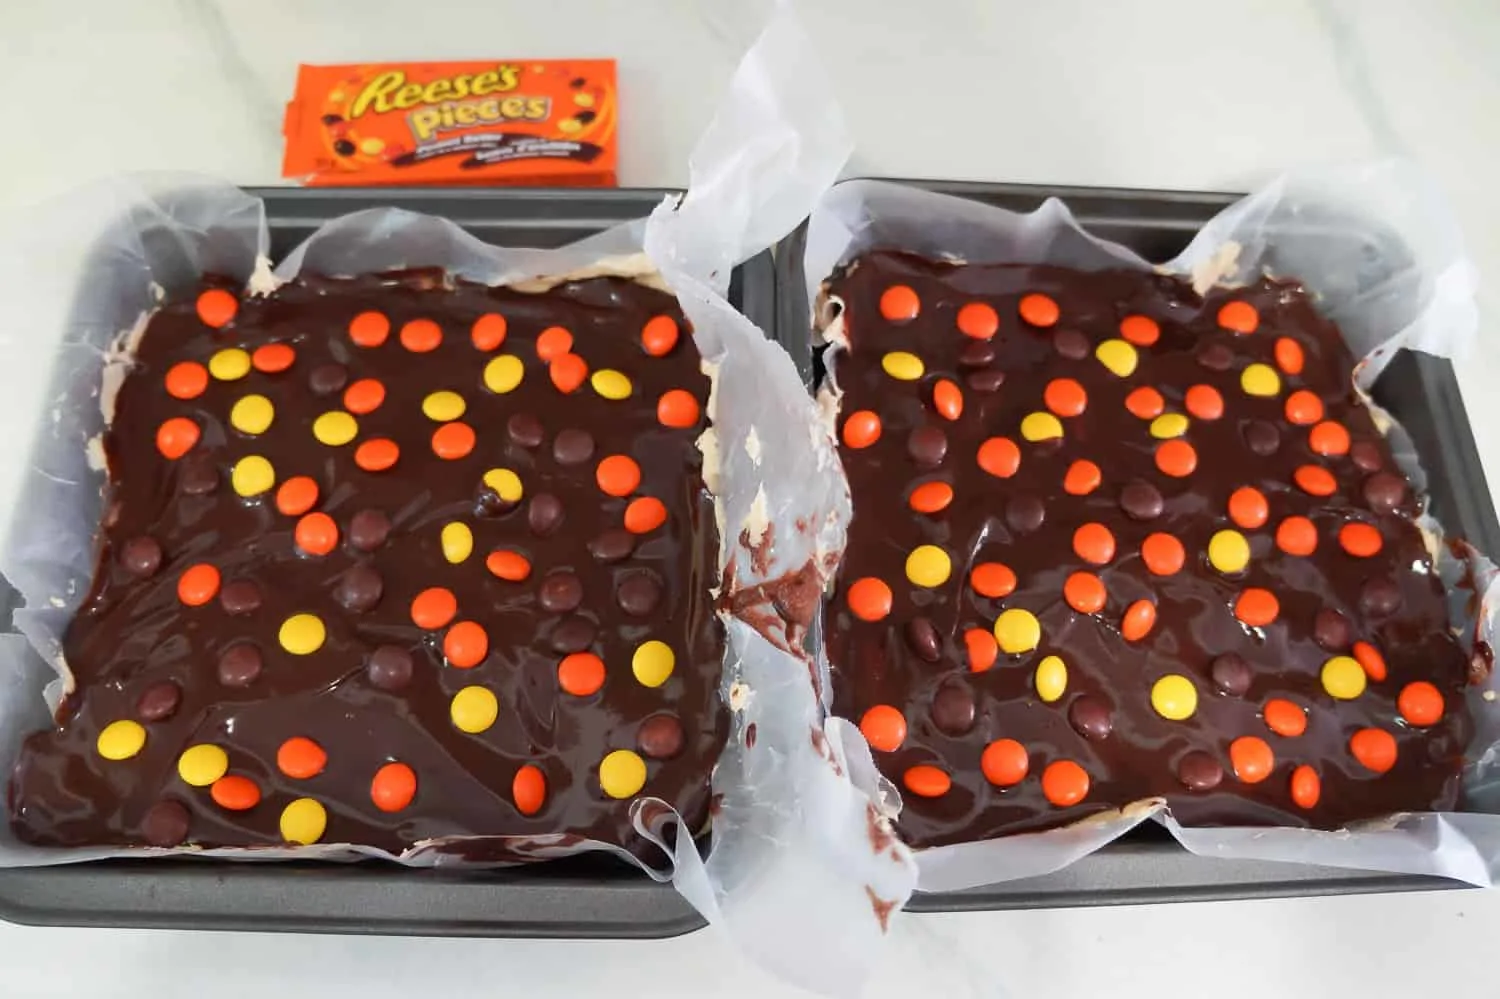 Reese's Pieces on top of brownies